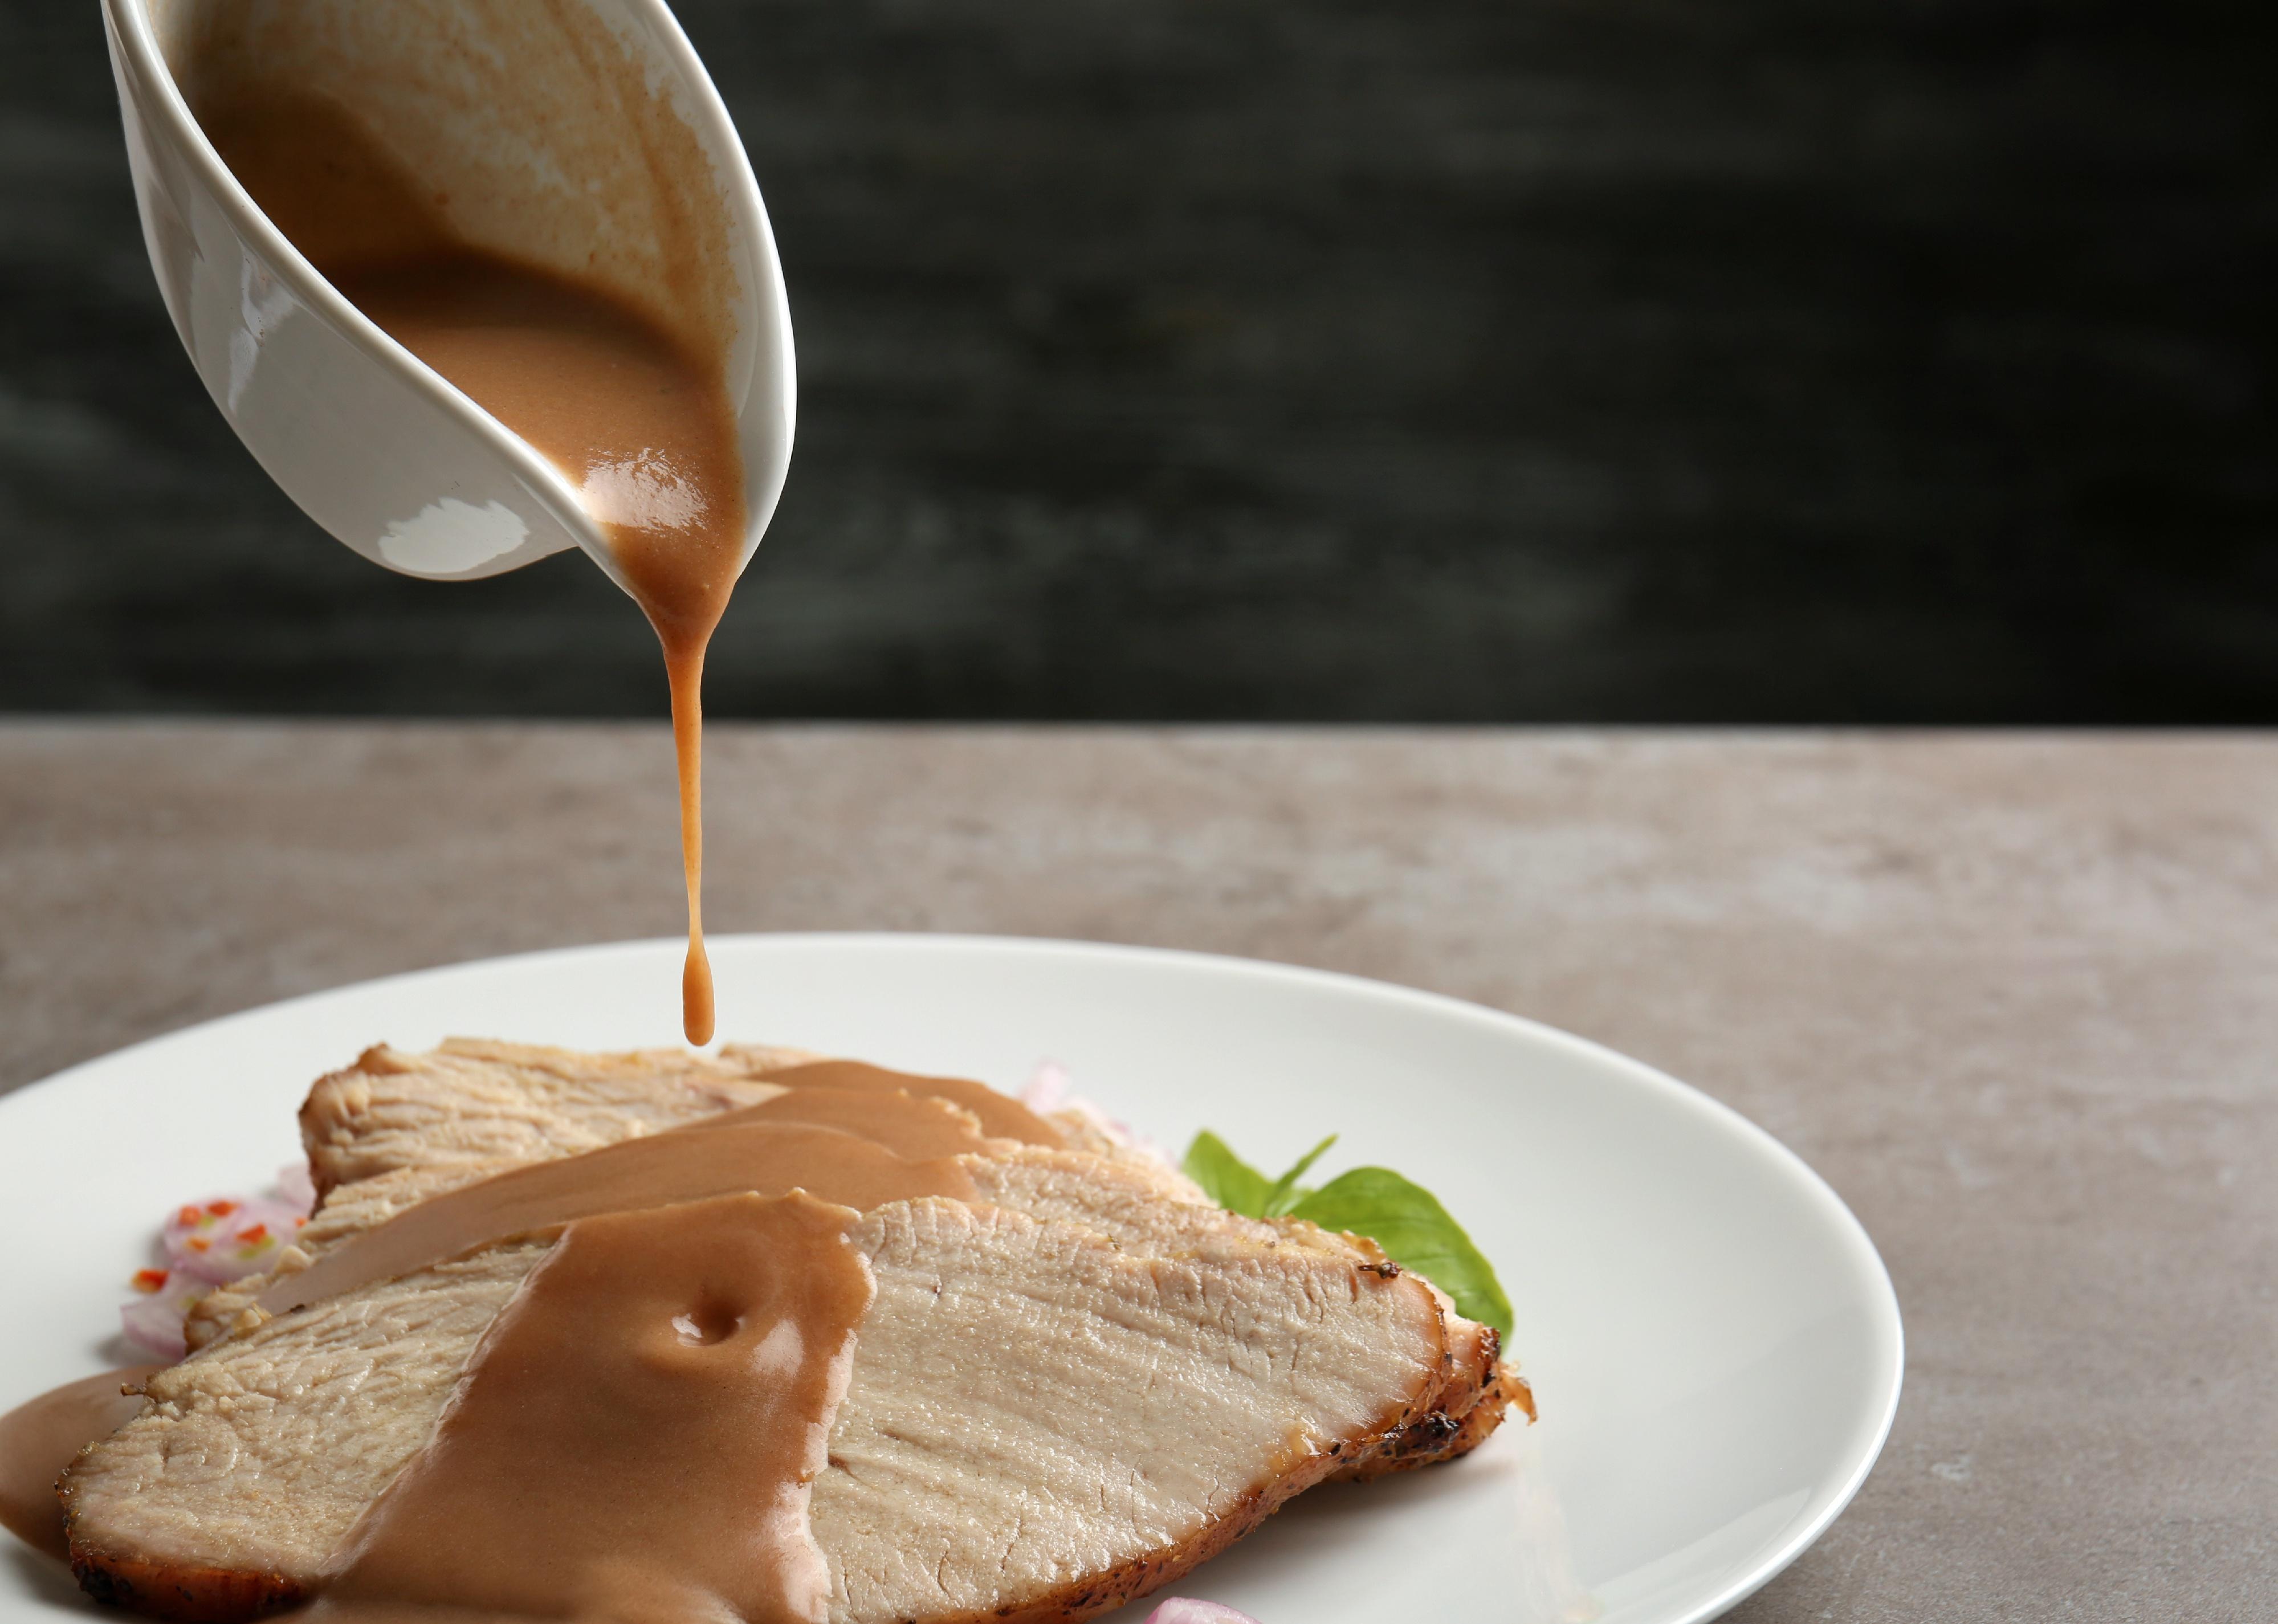 Turkey gravy is poured onto sliced meat on plate against dark background.